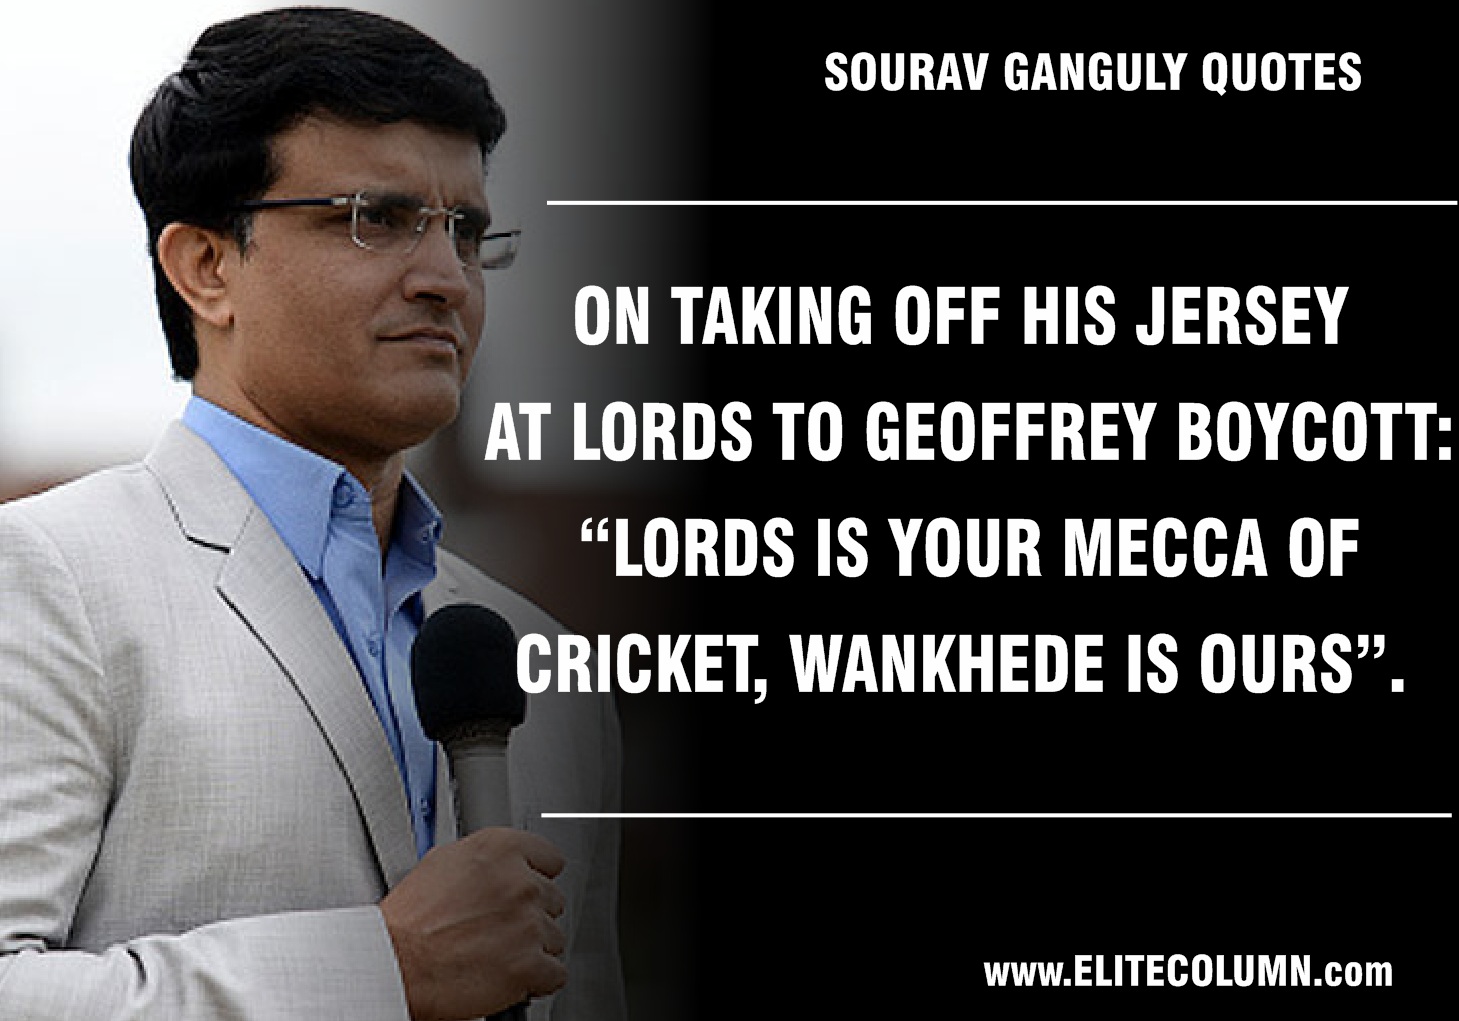 Sourav Ganguly Quotes (4)